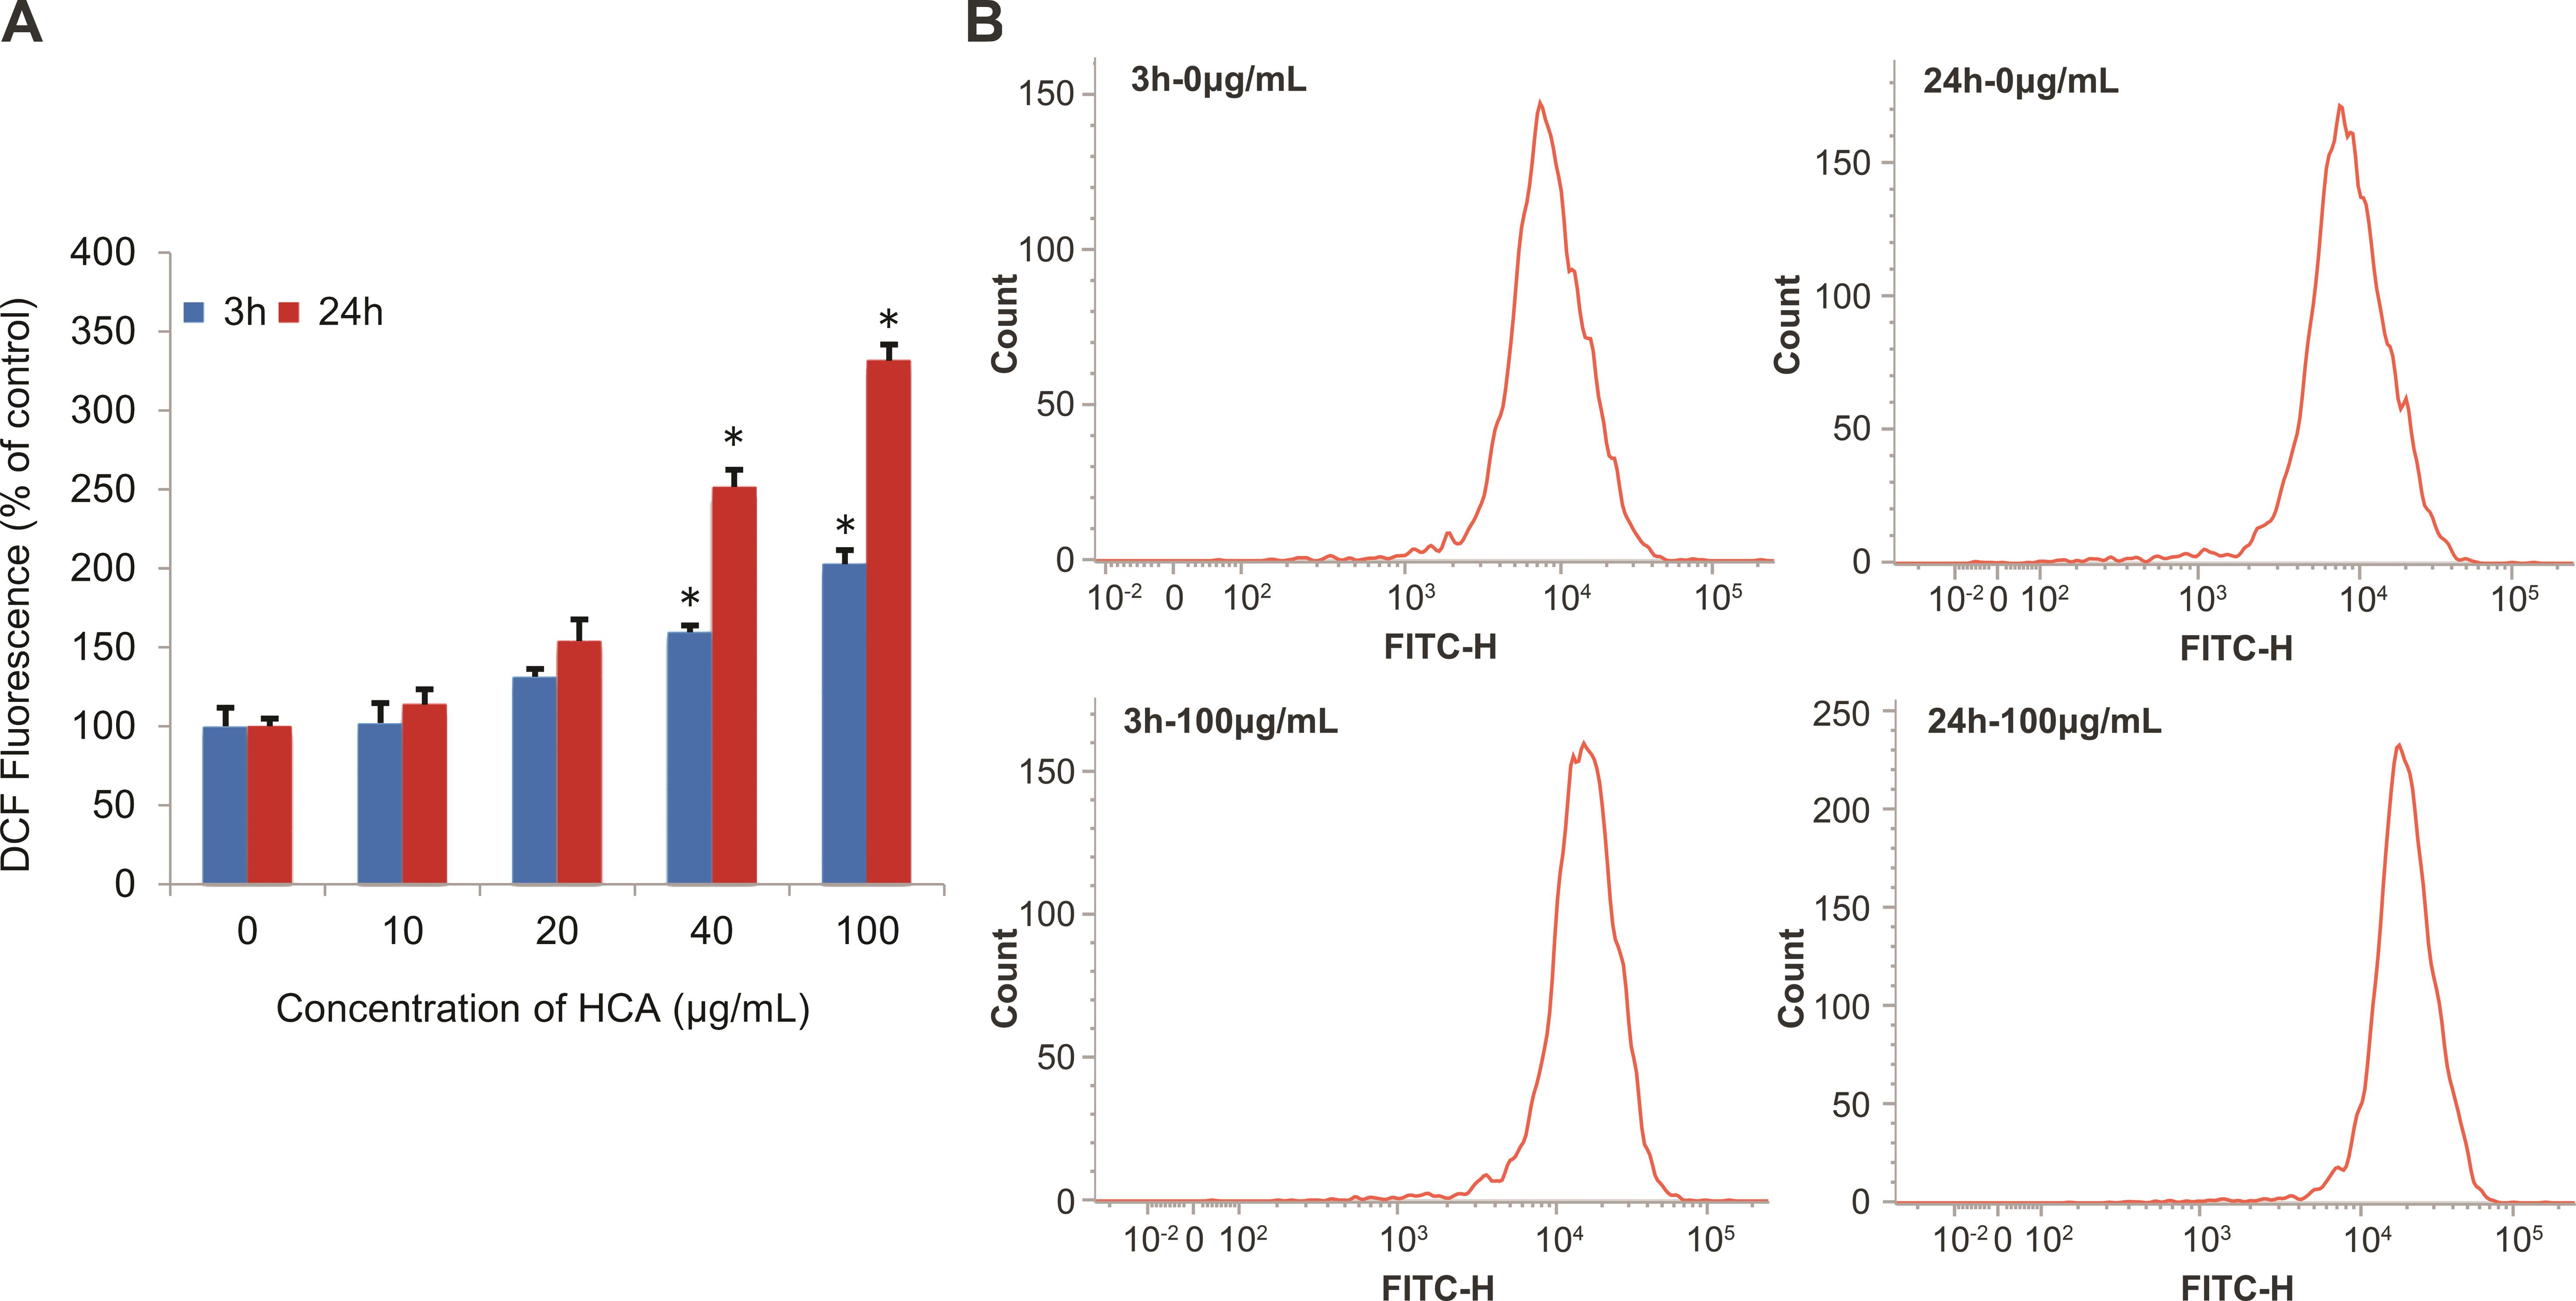 Dose-dependent induction of ROS generation in human lymphocytes treated with 0, 10, 20, 40 or 100 µg/mL HCA for 3 h and 24 h. 